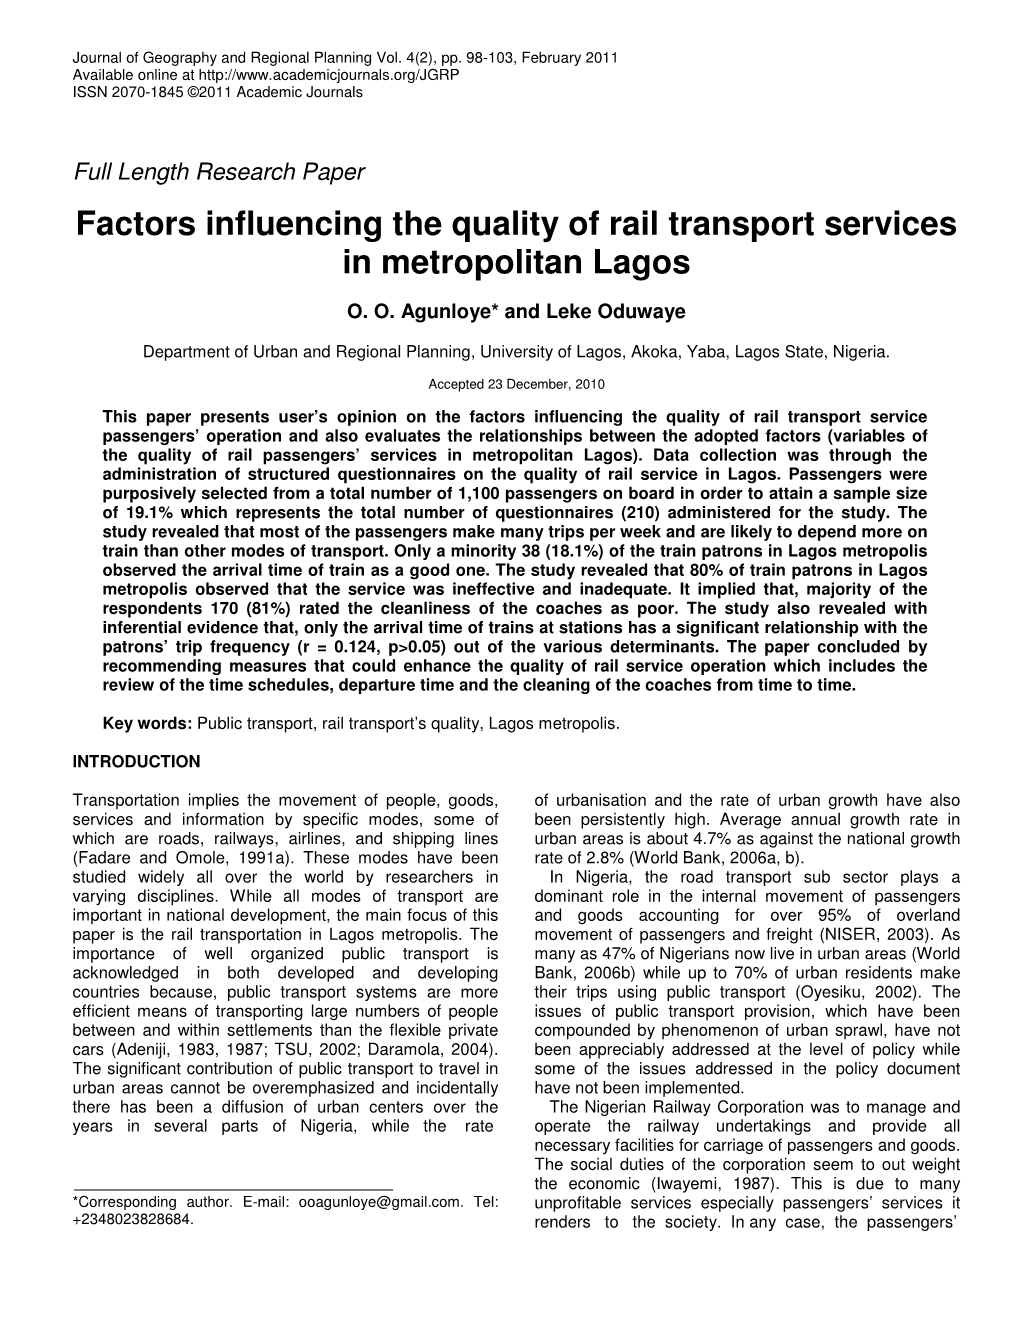 Factors Influencing the Quality of Rail Transport Services in Metropolitan Lagos